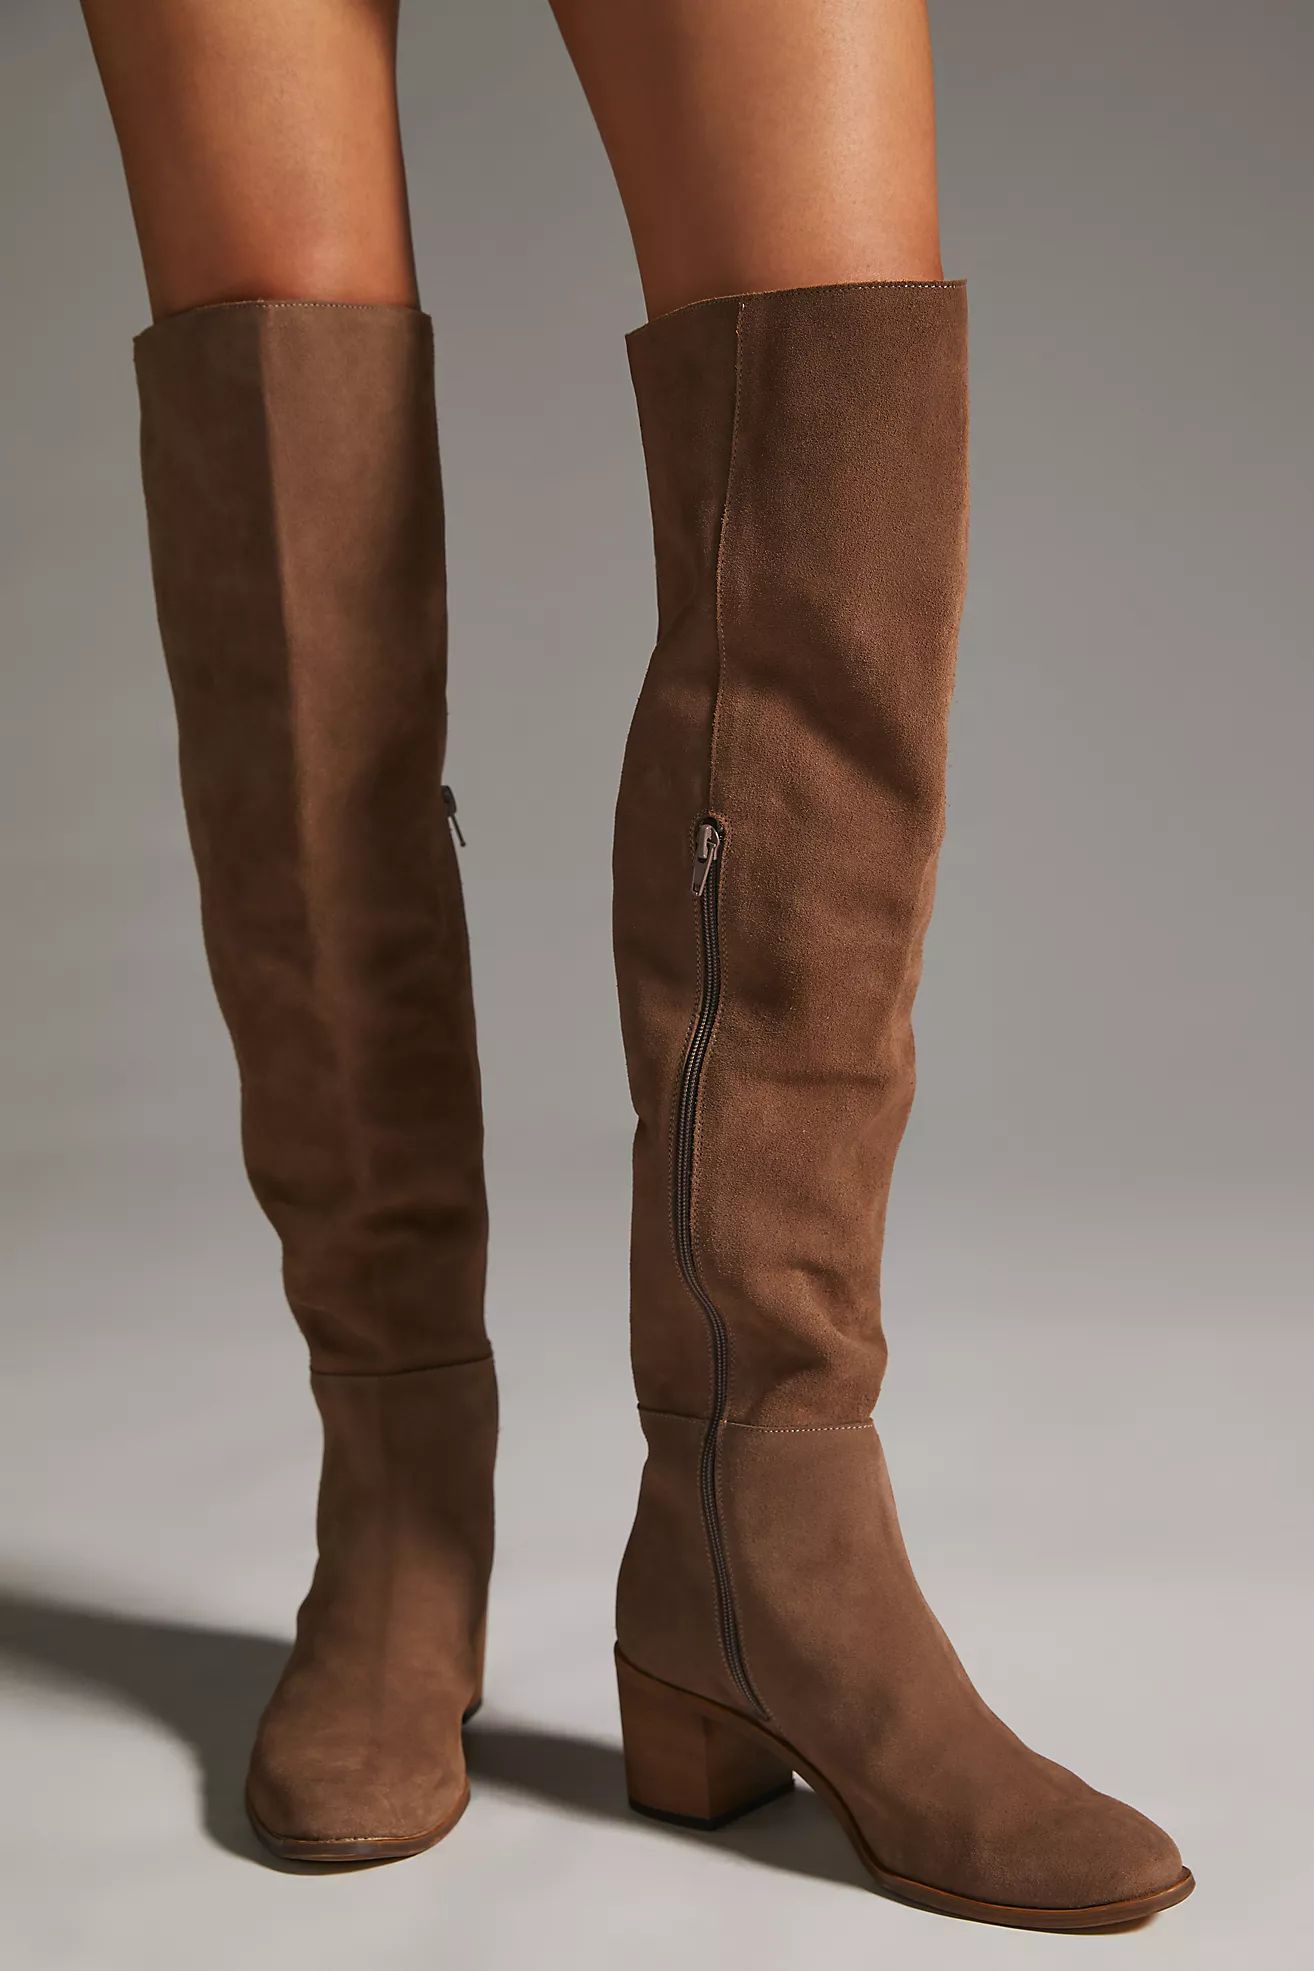 By Anthropologie Over-The-Knee Block-Heel Boots | Anthropologie (US)